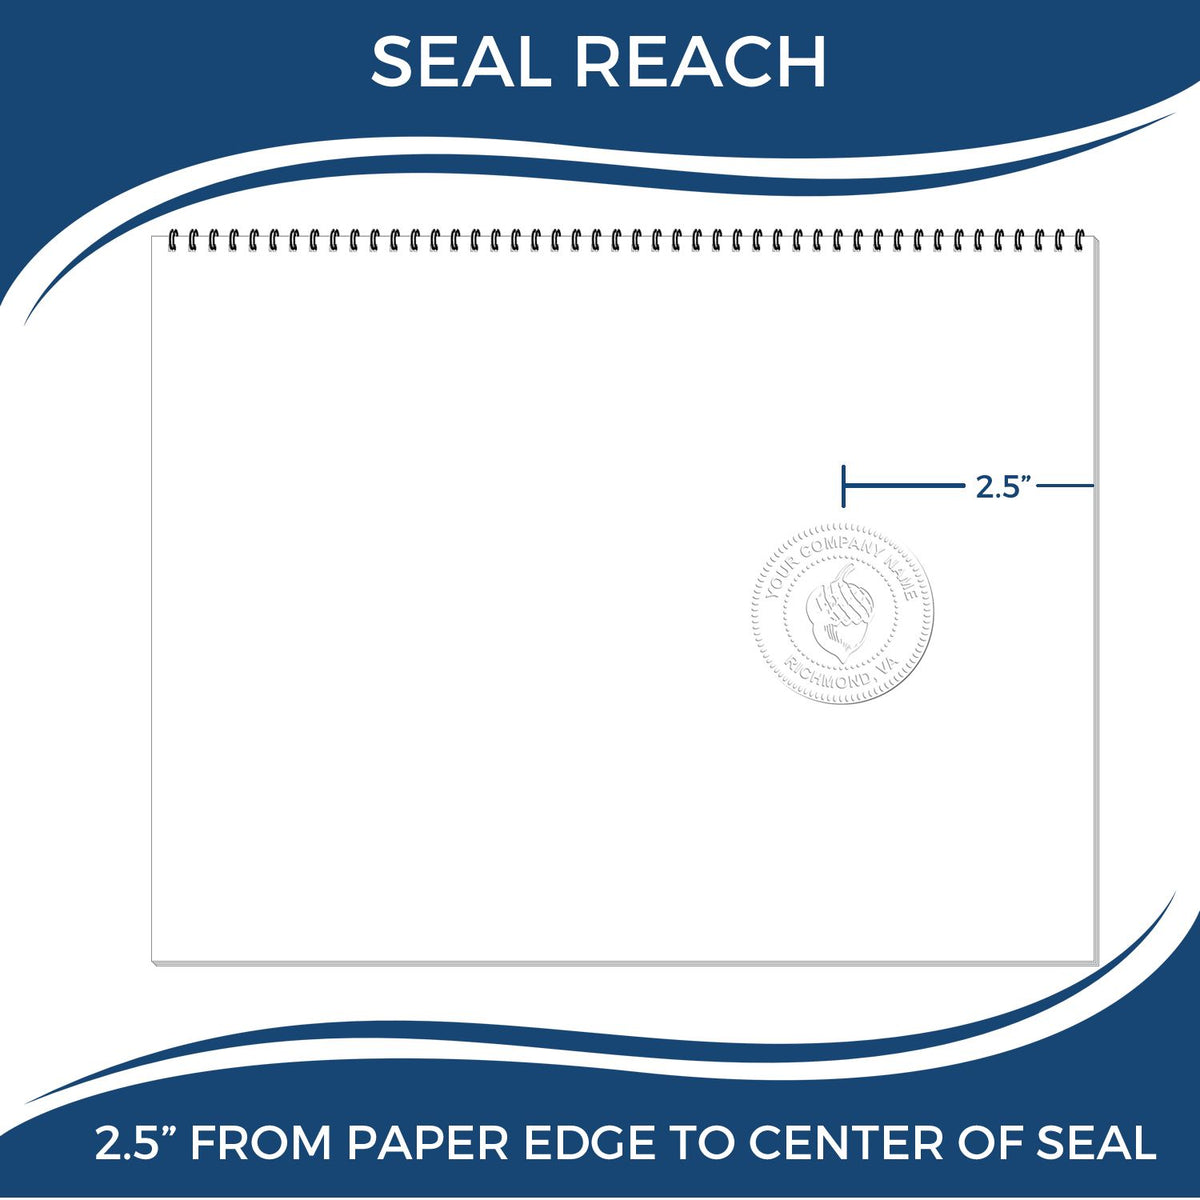 An infographic showing the seal reach which is represented by a ruler and a miniature seal image of the State of Iowa Long Reach Architectural Embossing Seal